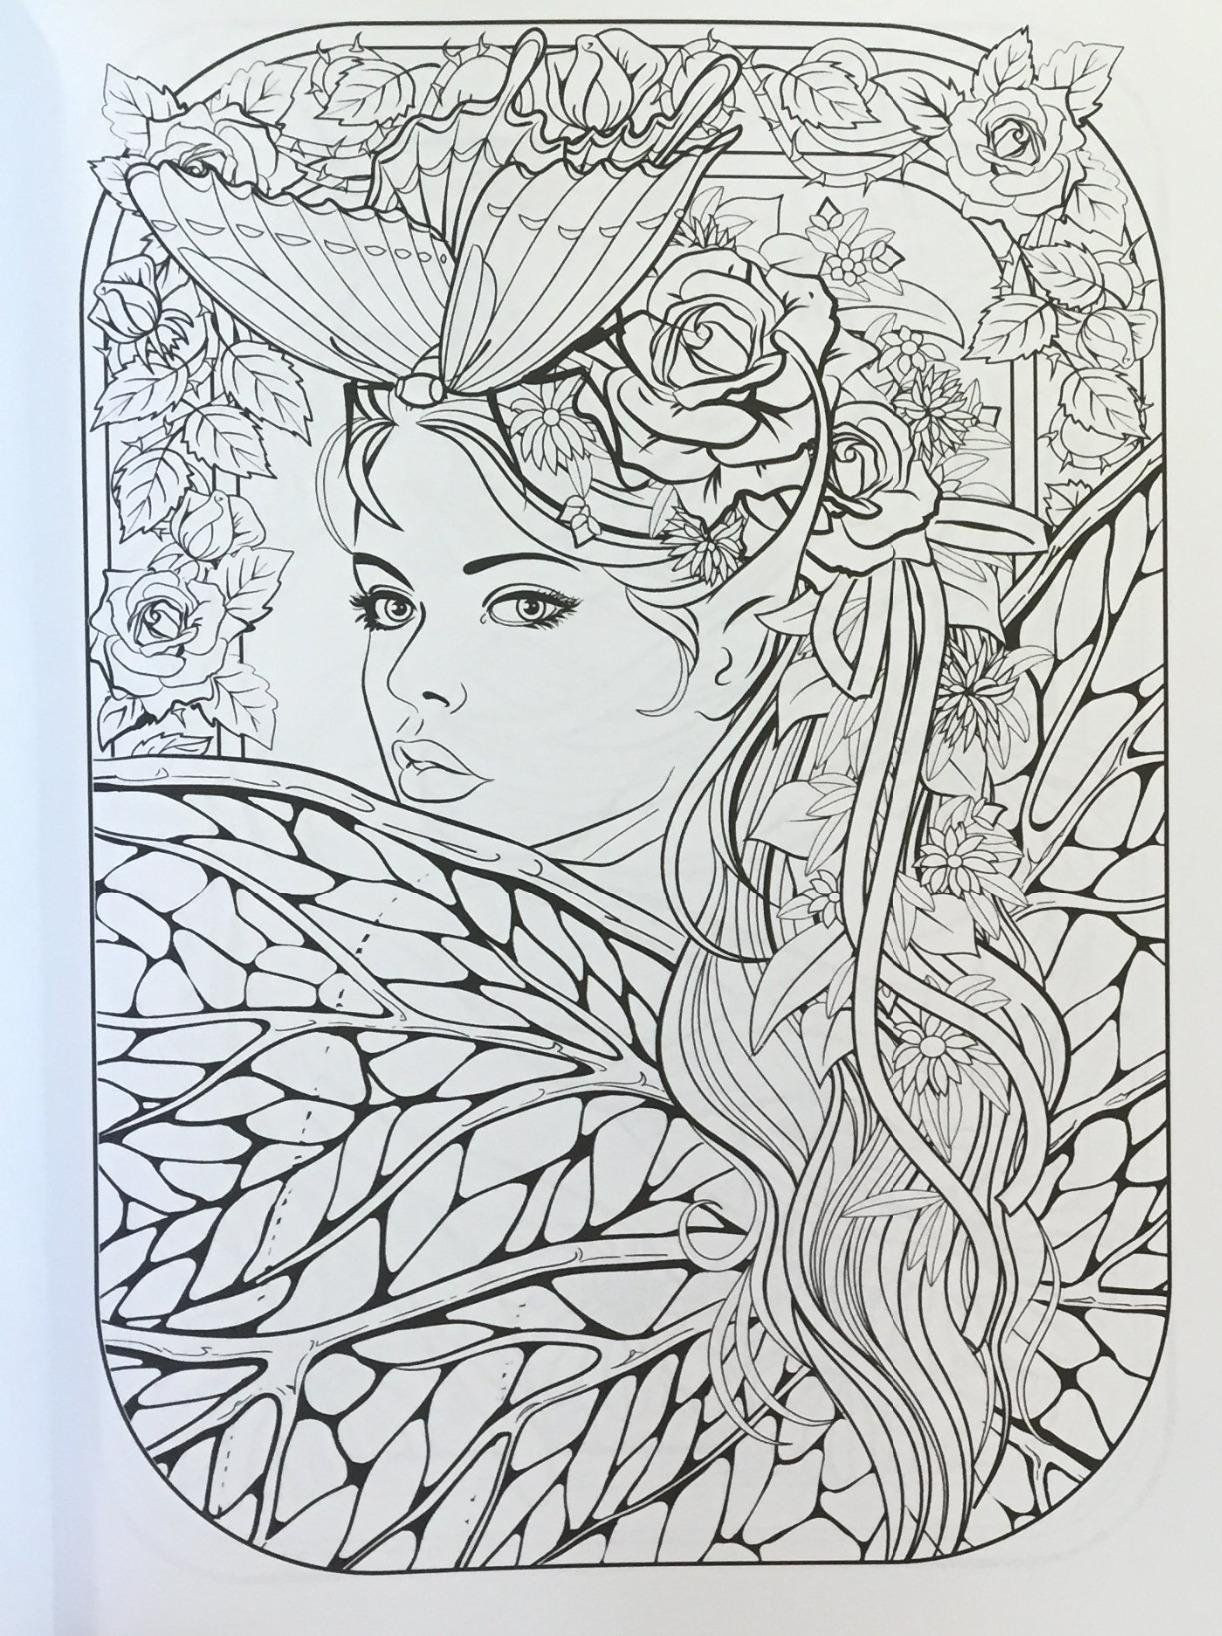 Coloring Book Art For Adults | Best Review